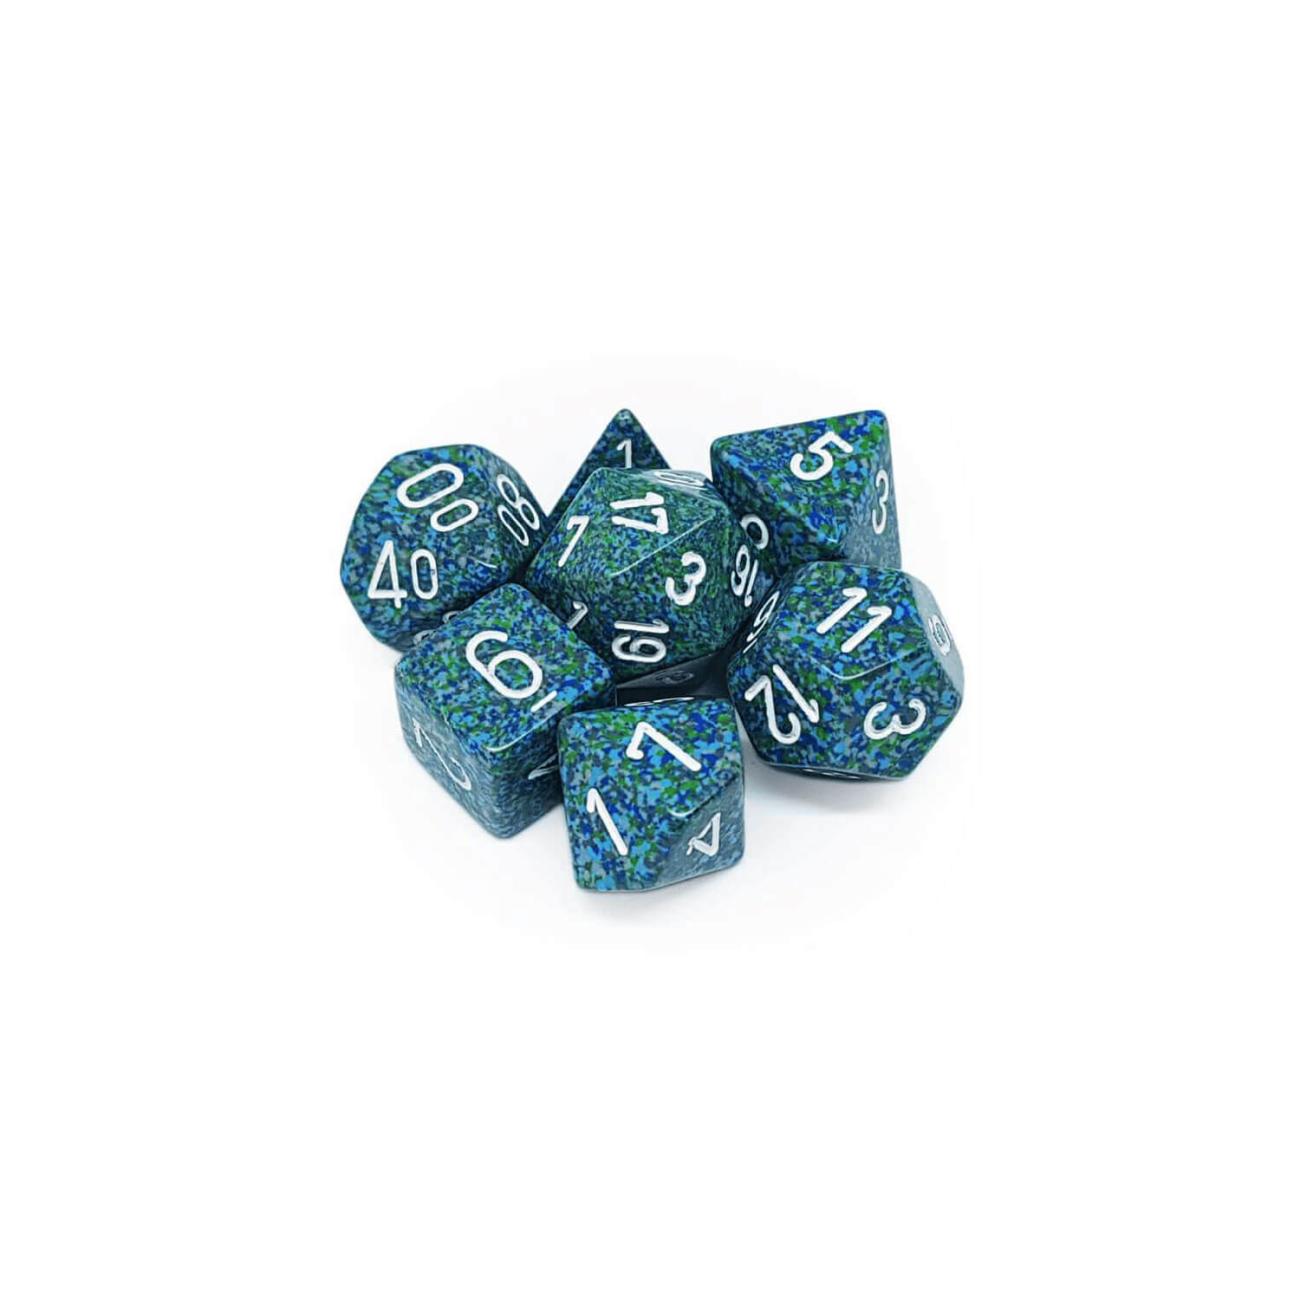 Speckled Sea: Polyhedral Set (7)